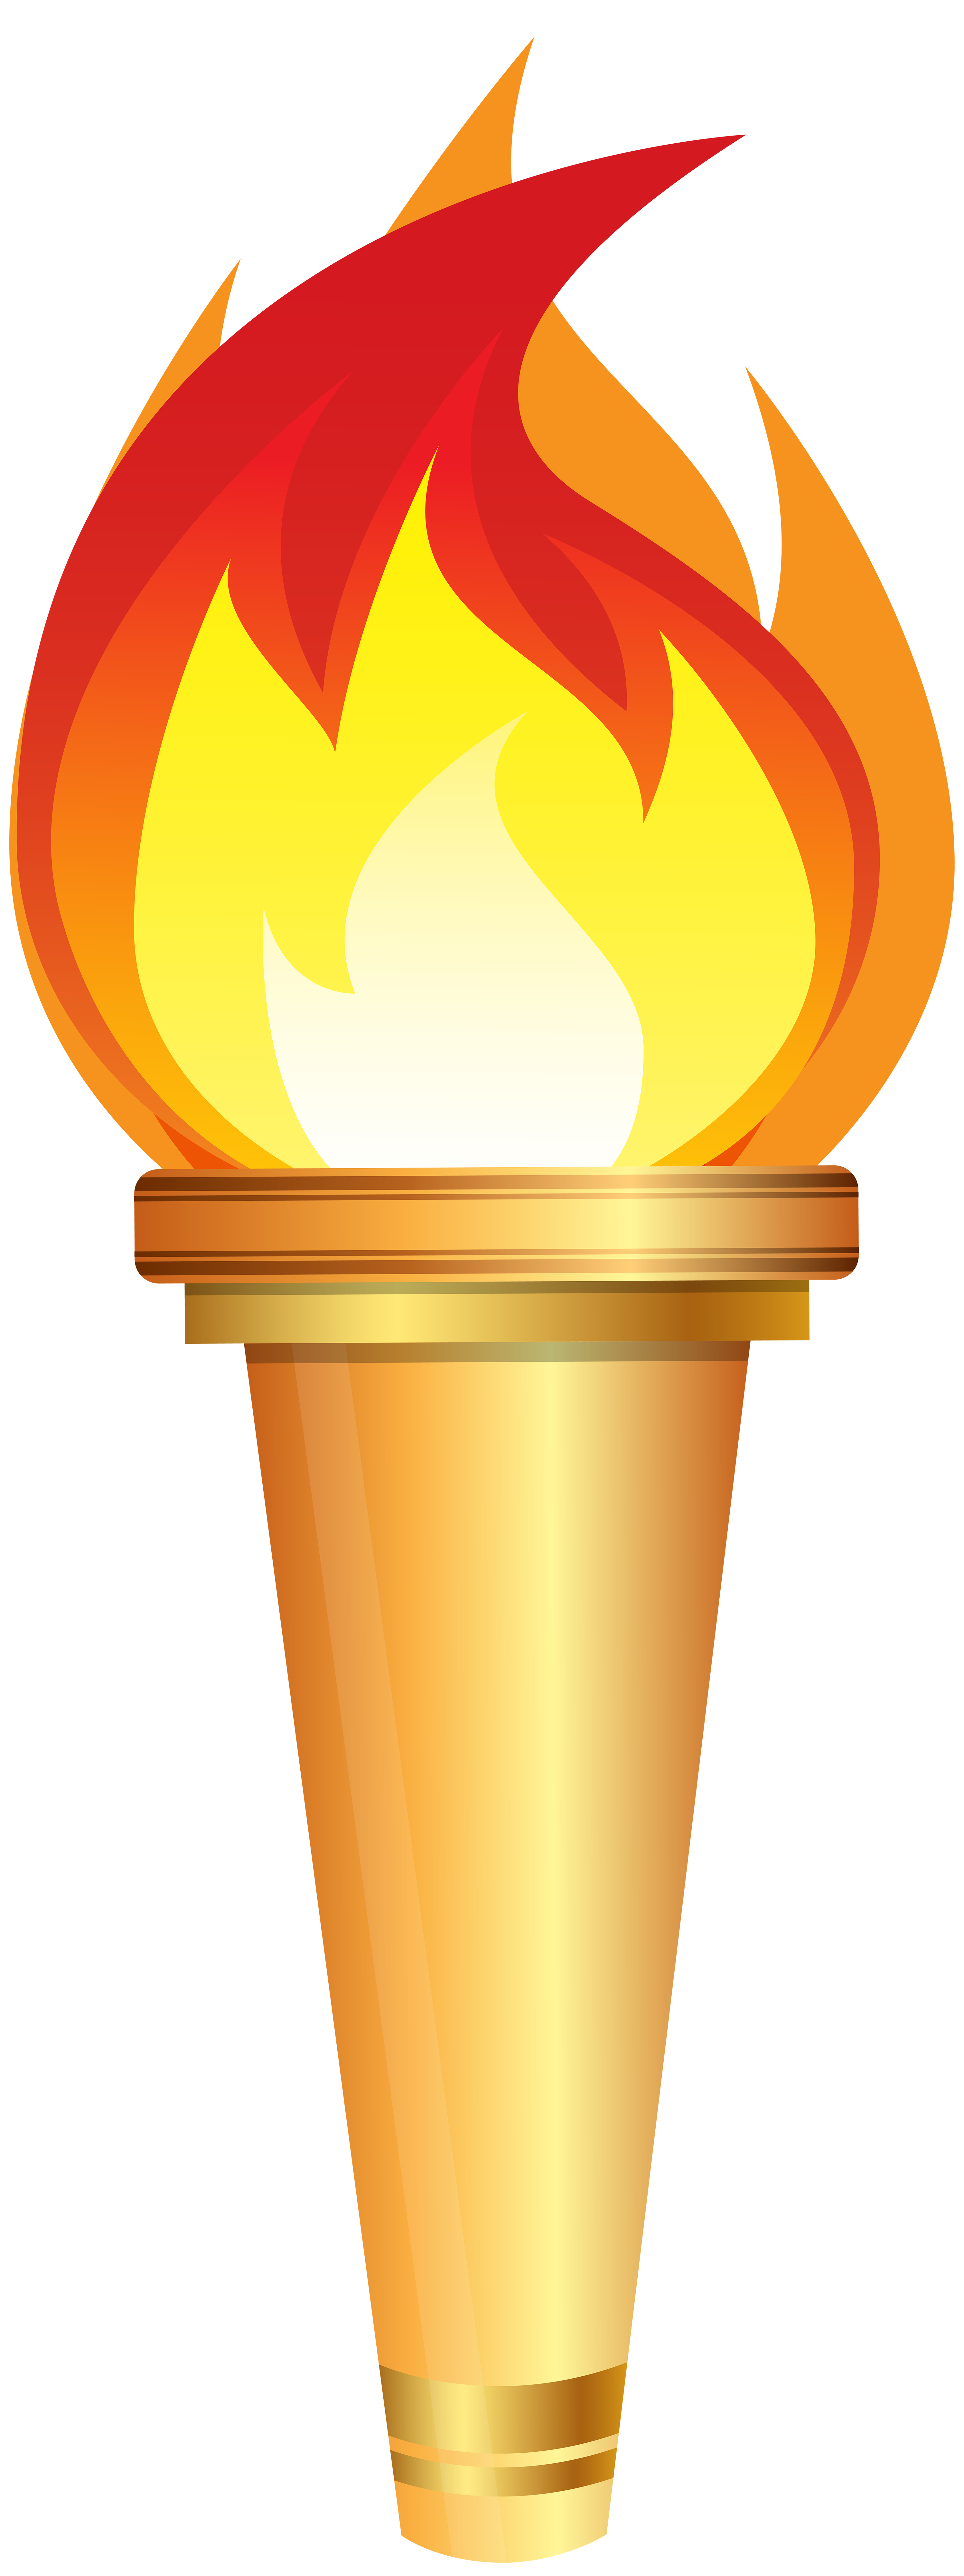 Torch Clipart Hd PNG, Burning Torch Clip Art, Torch, Clipart, Flame PNG ...